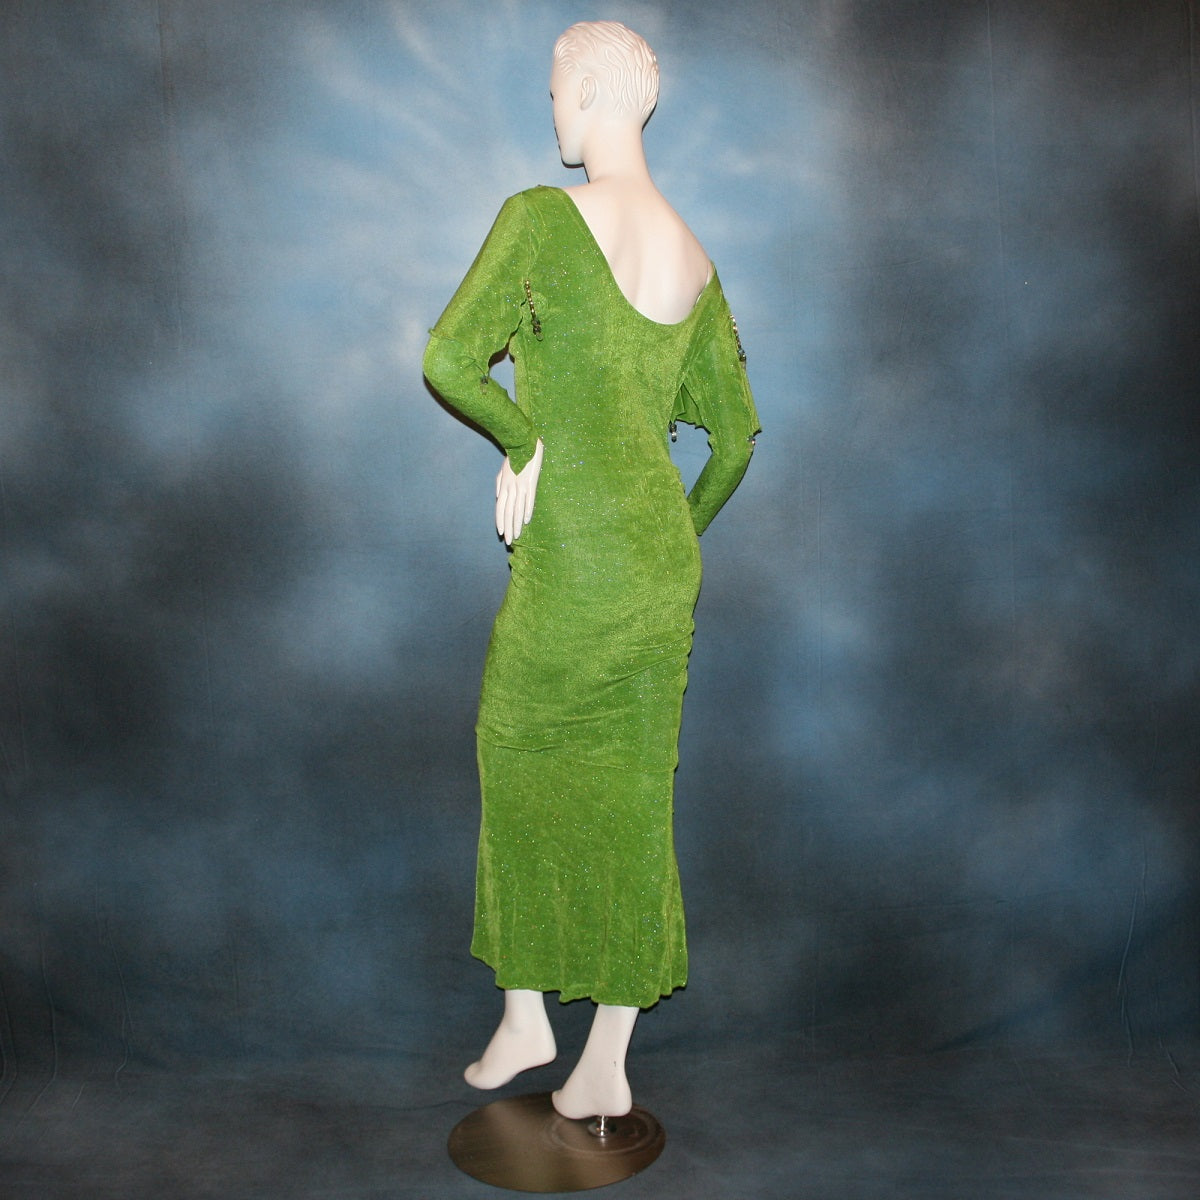 bach view of Apple green social Latin/rhythm dress was created of apple green glitter slinky, features ruching on the right side, long sleeves, scoop back, & full skirting with open side that has Swarovski hand beaded detail